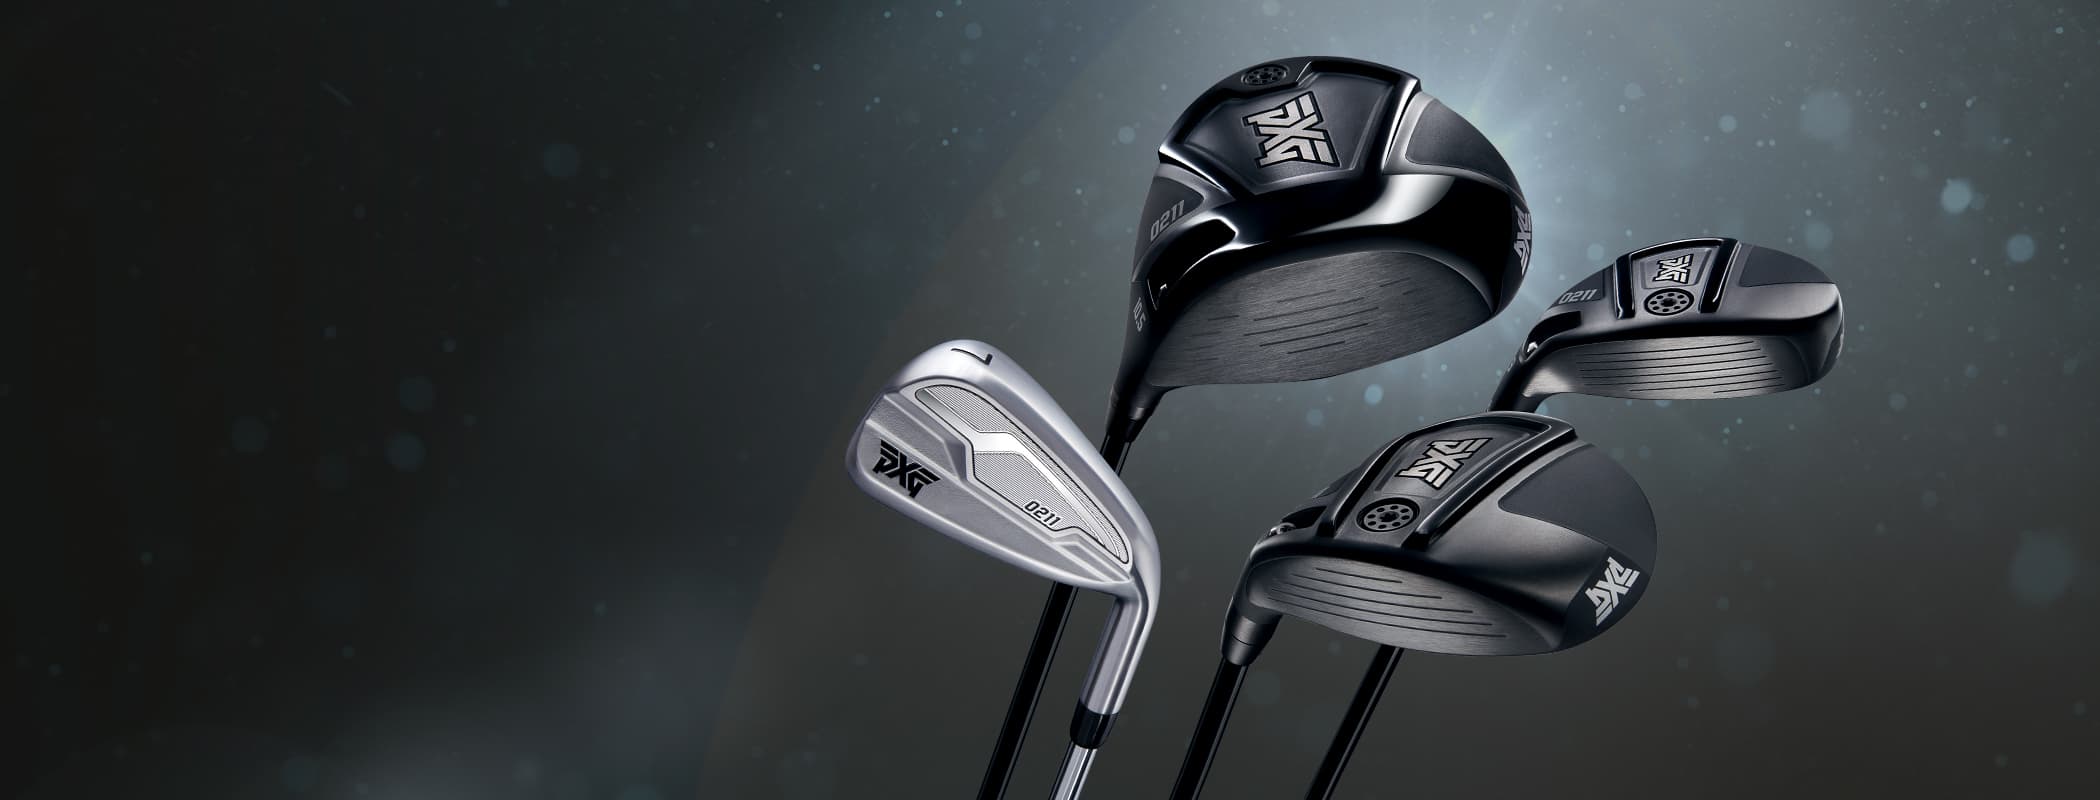 PXG 0211 woods and iron